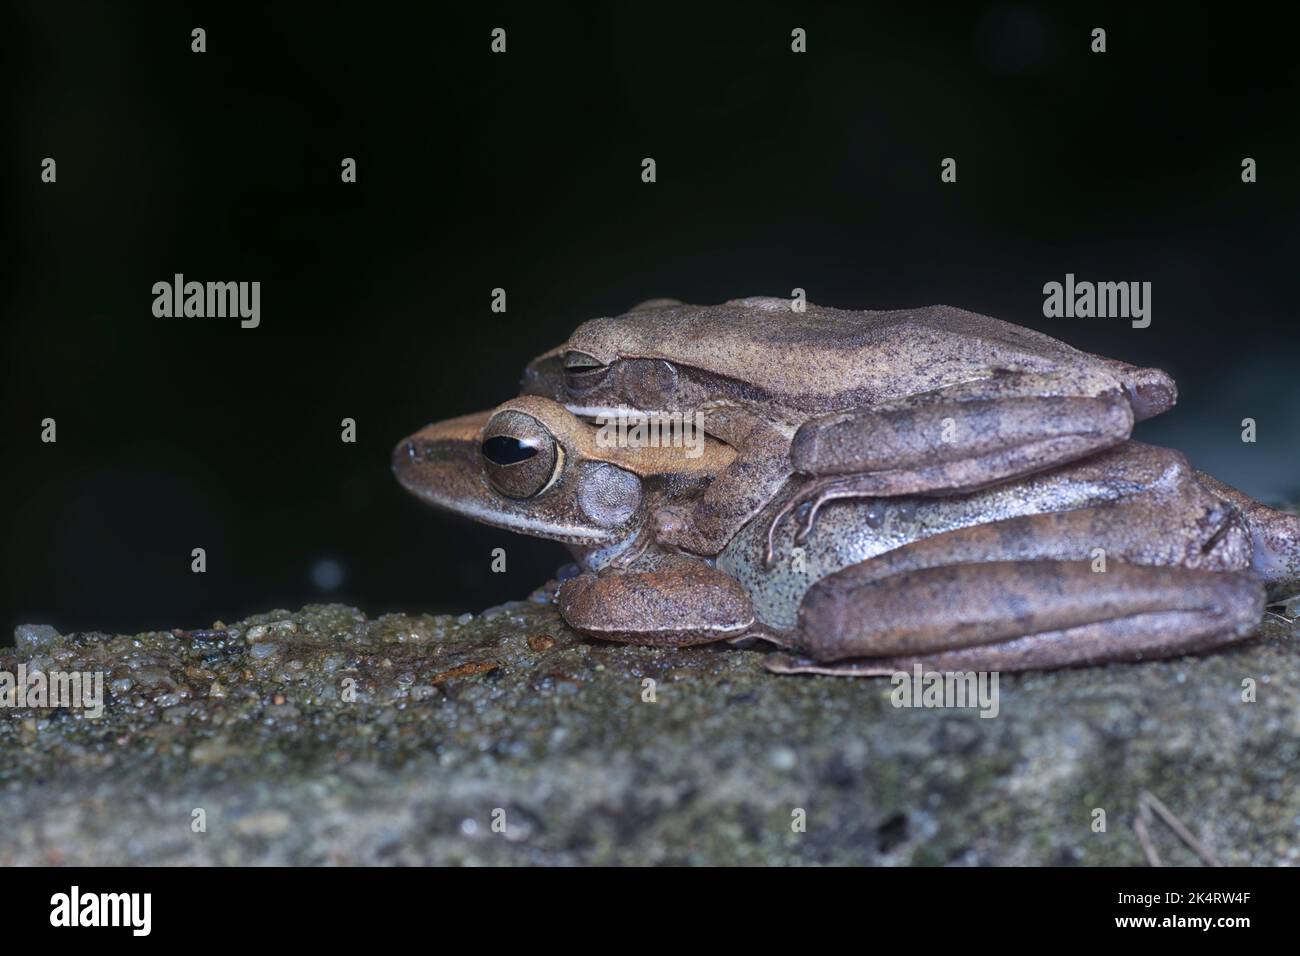 two common bush frogs clinging onto each other. Stock Photo